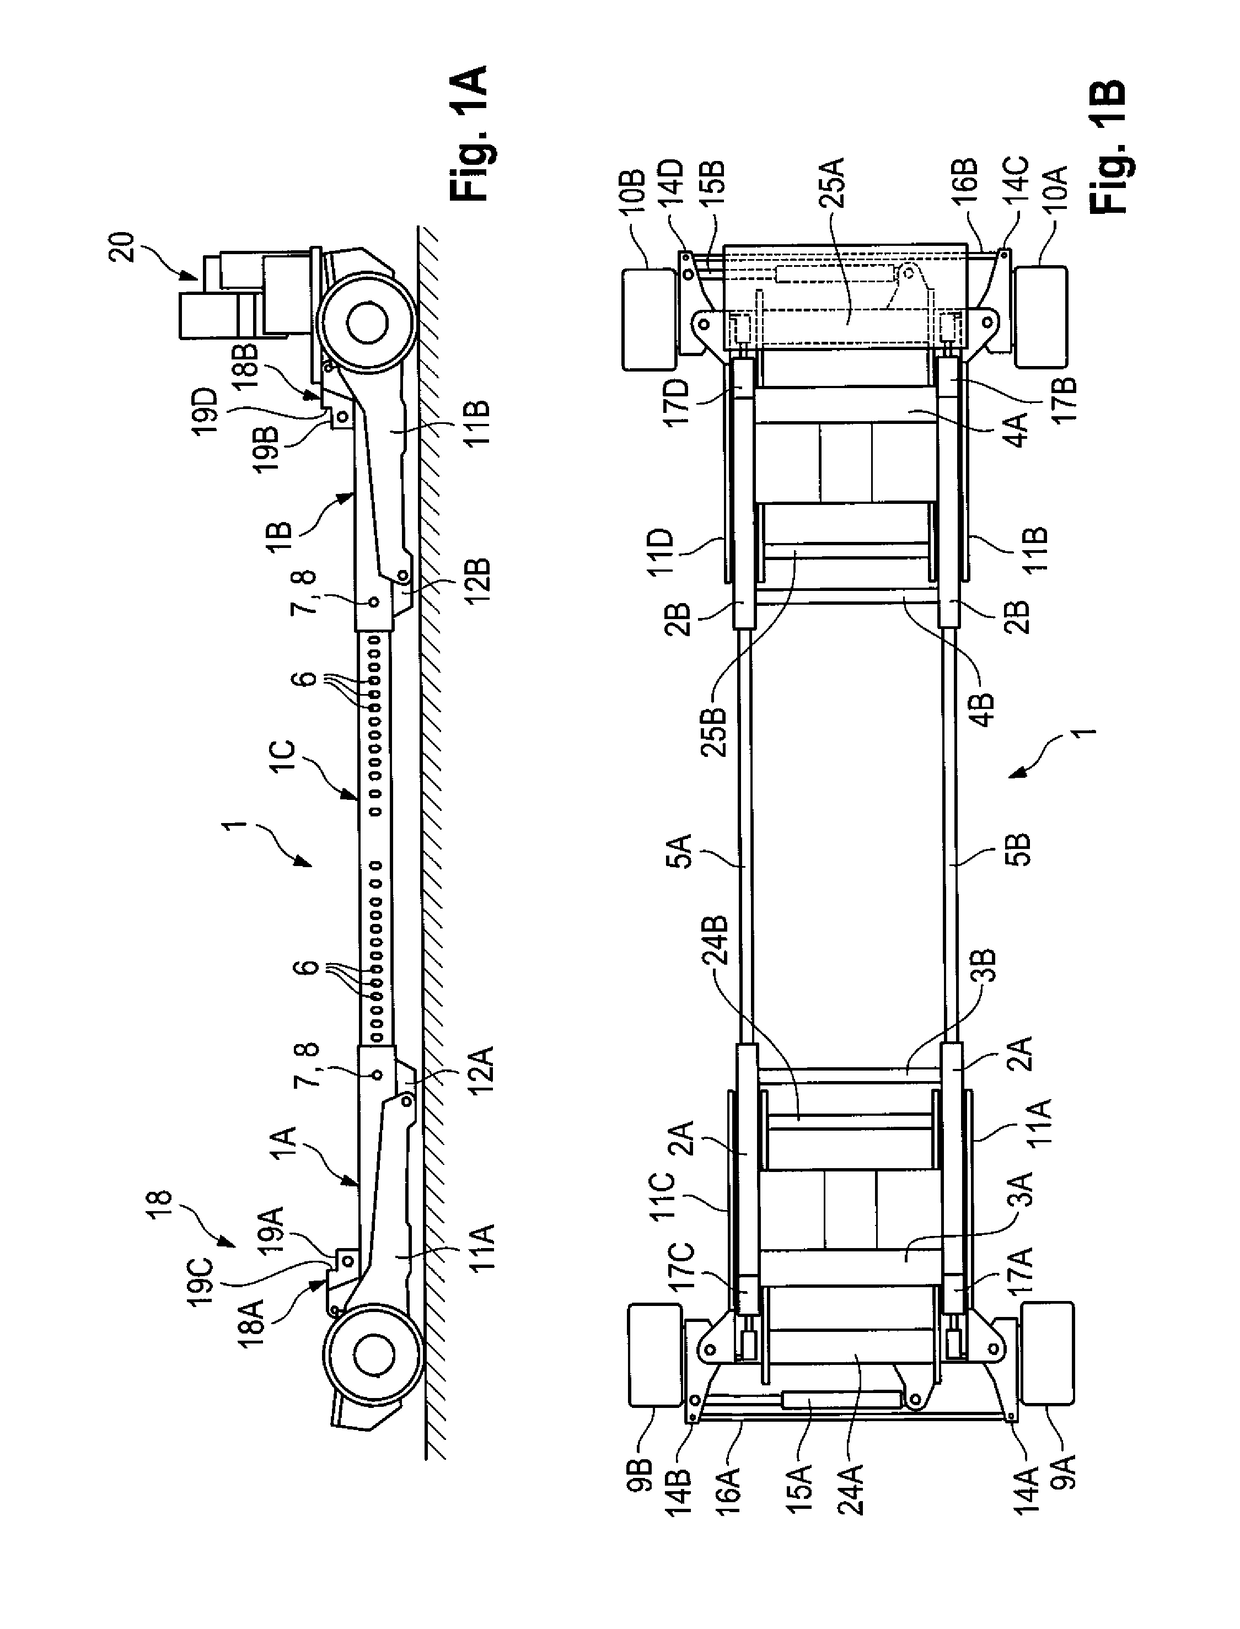 Positioning Arrangement For Fitting An Interchangeable Milling Assembly Of A Road-Building Machine